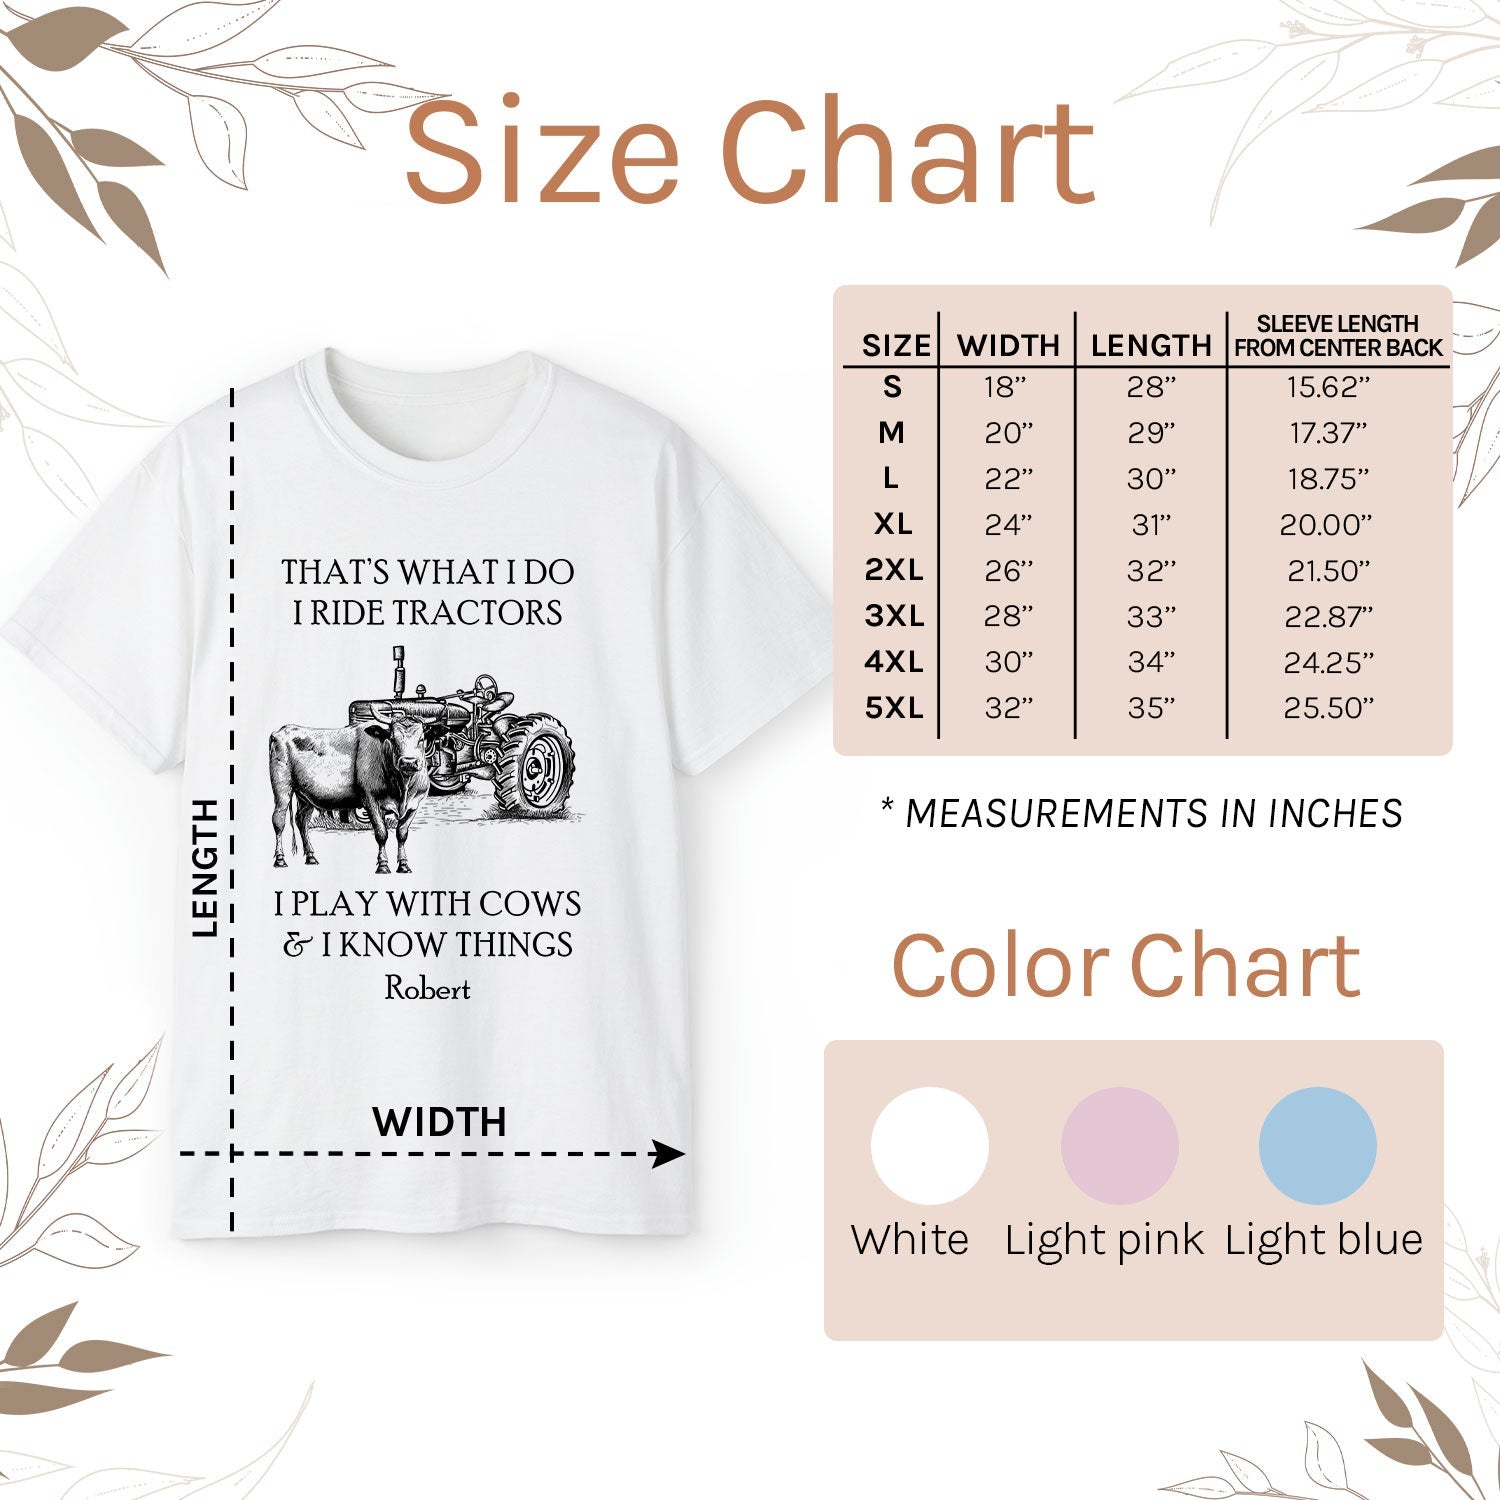 I Ride Tractors I Play With Cows And I Know Things - Personalized  gift For Farmer - Custom Tshirt - MyMindfulGifts